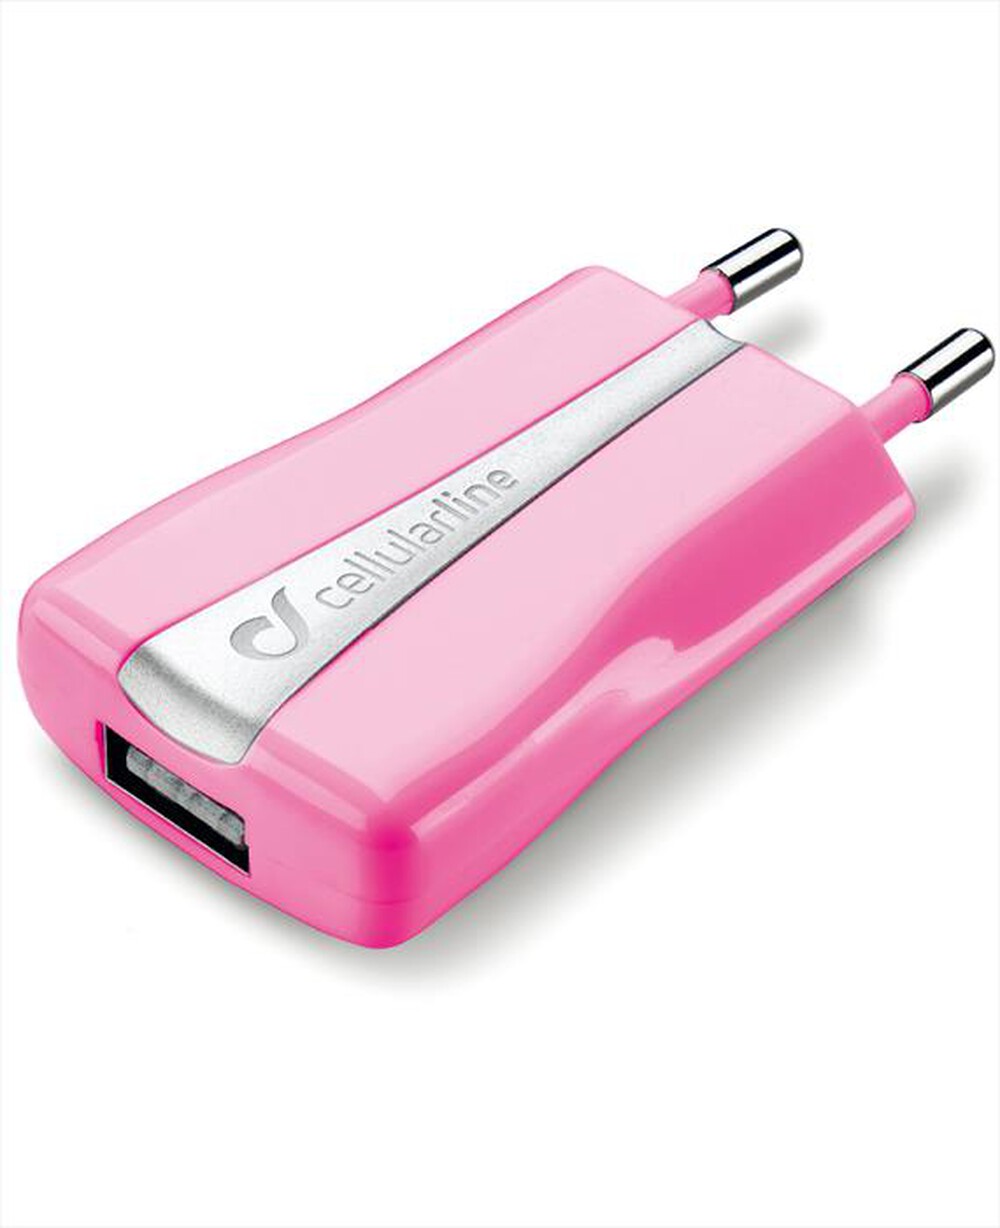 "CELLULARLINE - USB Compact Charger ACHUSBCOMPACTCP-Rosa"